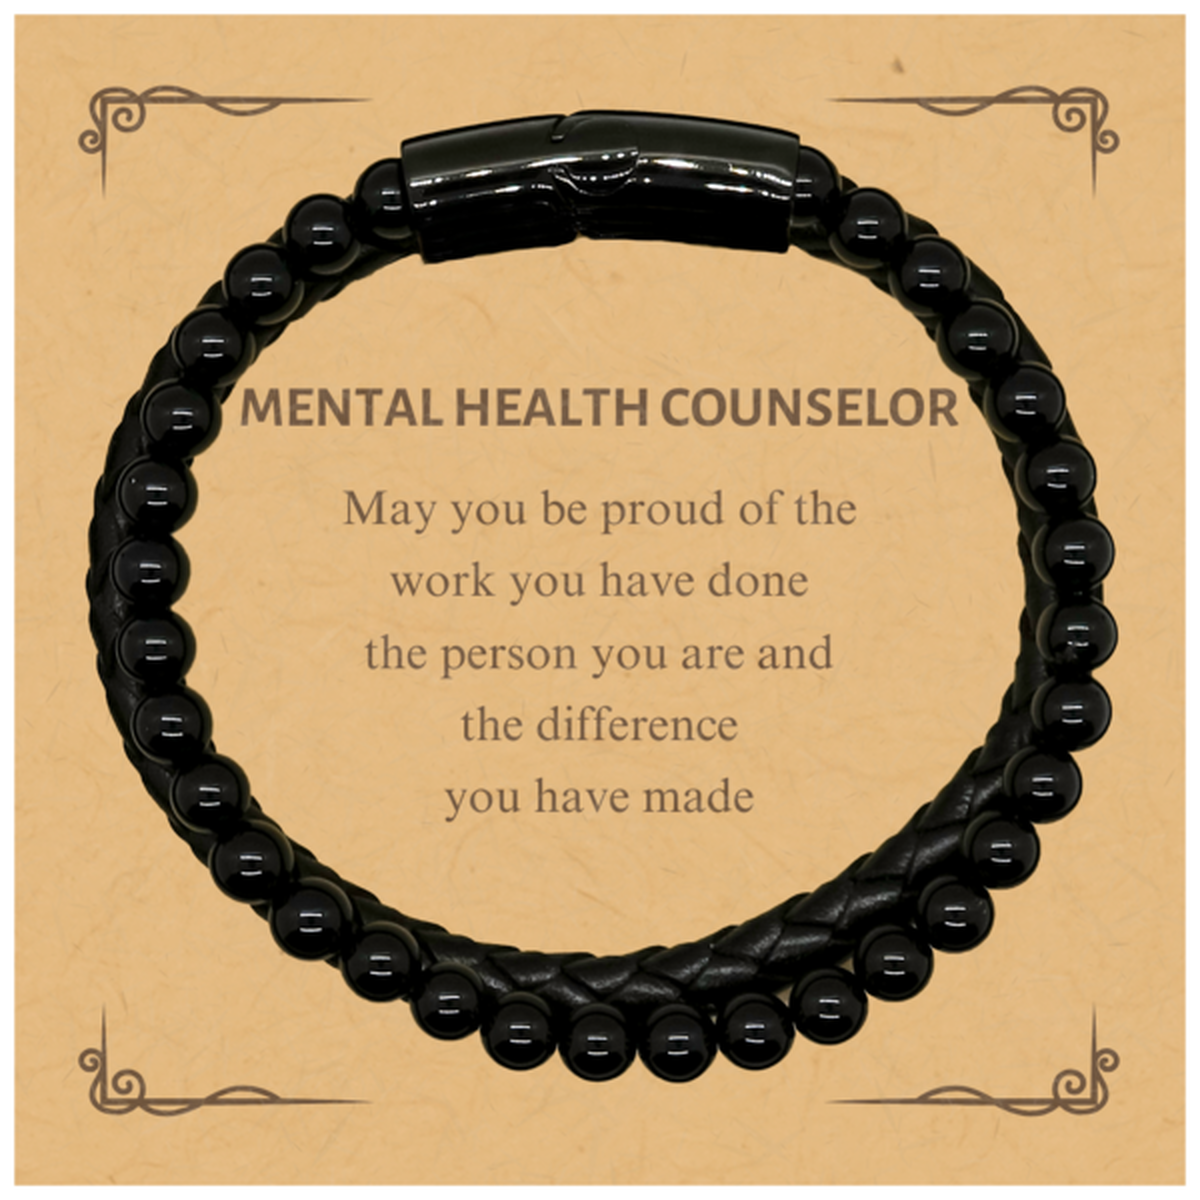 Mental Health Counselor May you be proud of the work you have done, Retirement Mental Health Counselor Stone Leather Bracelets for Colleague Appreciation Gifts Amazing for Mental Health Counselor